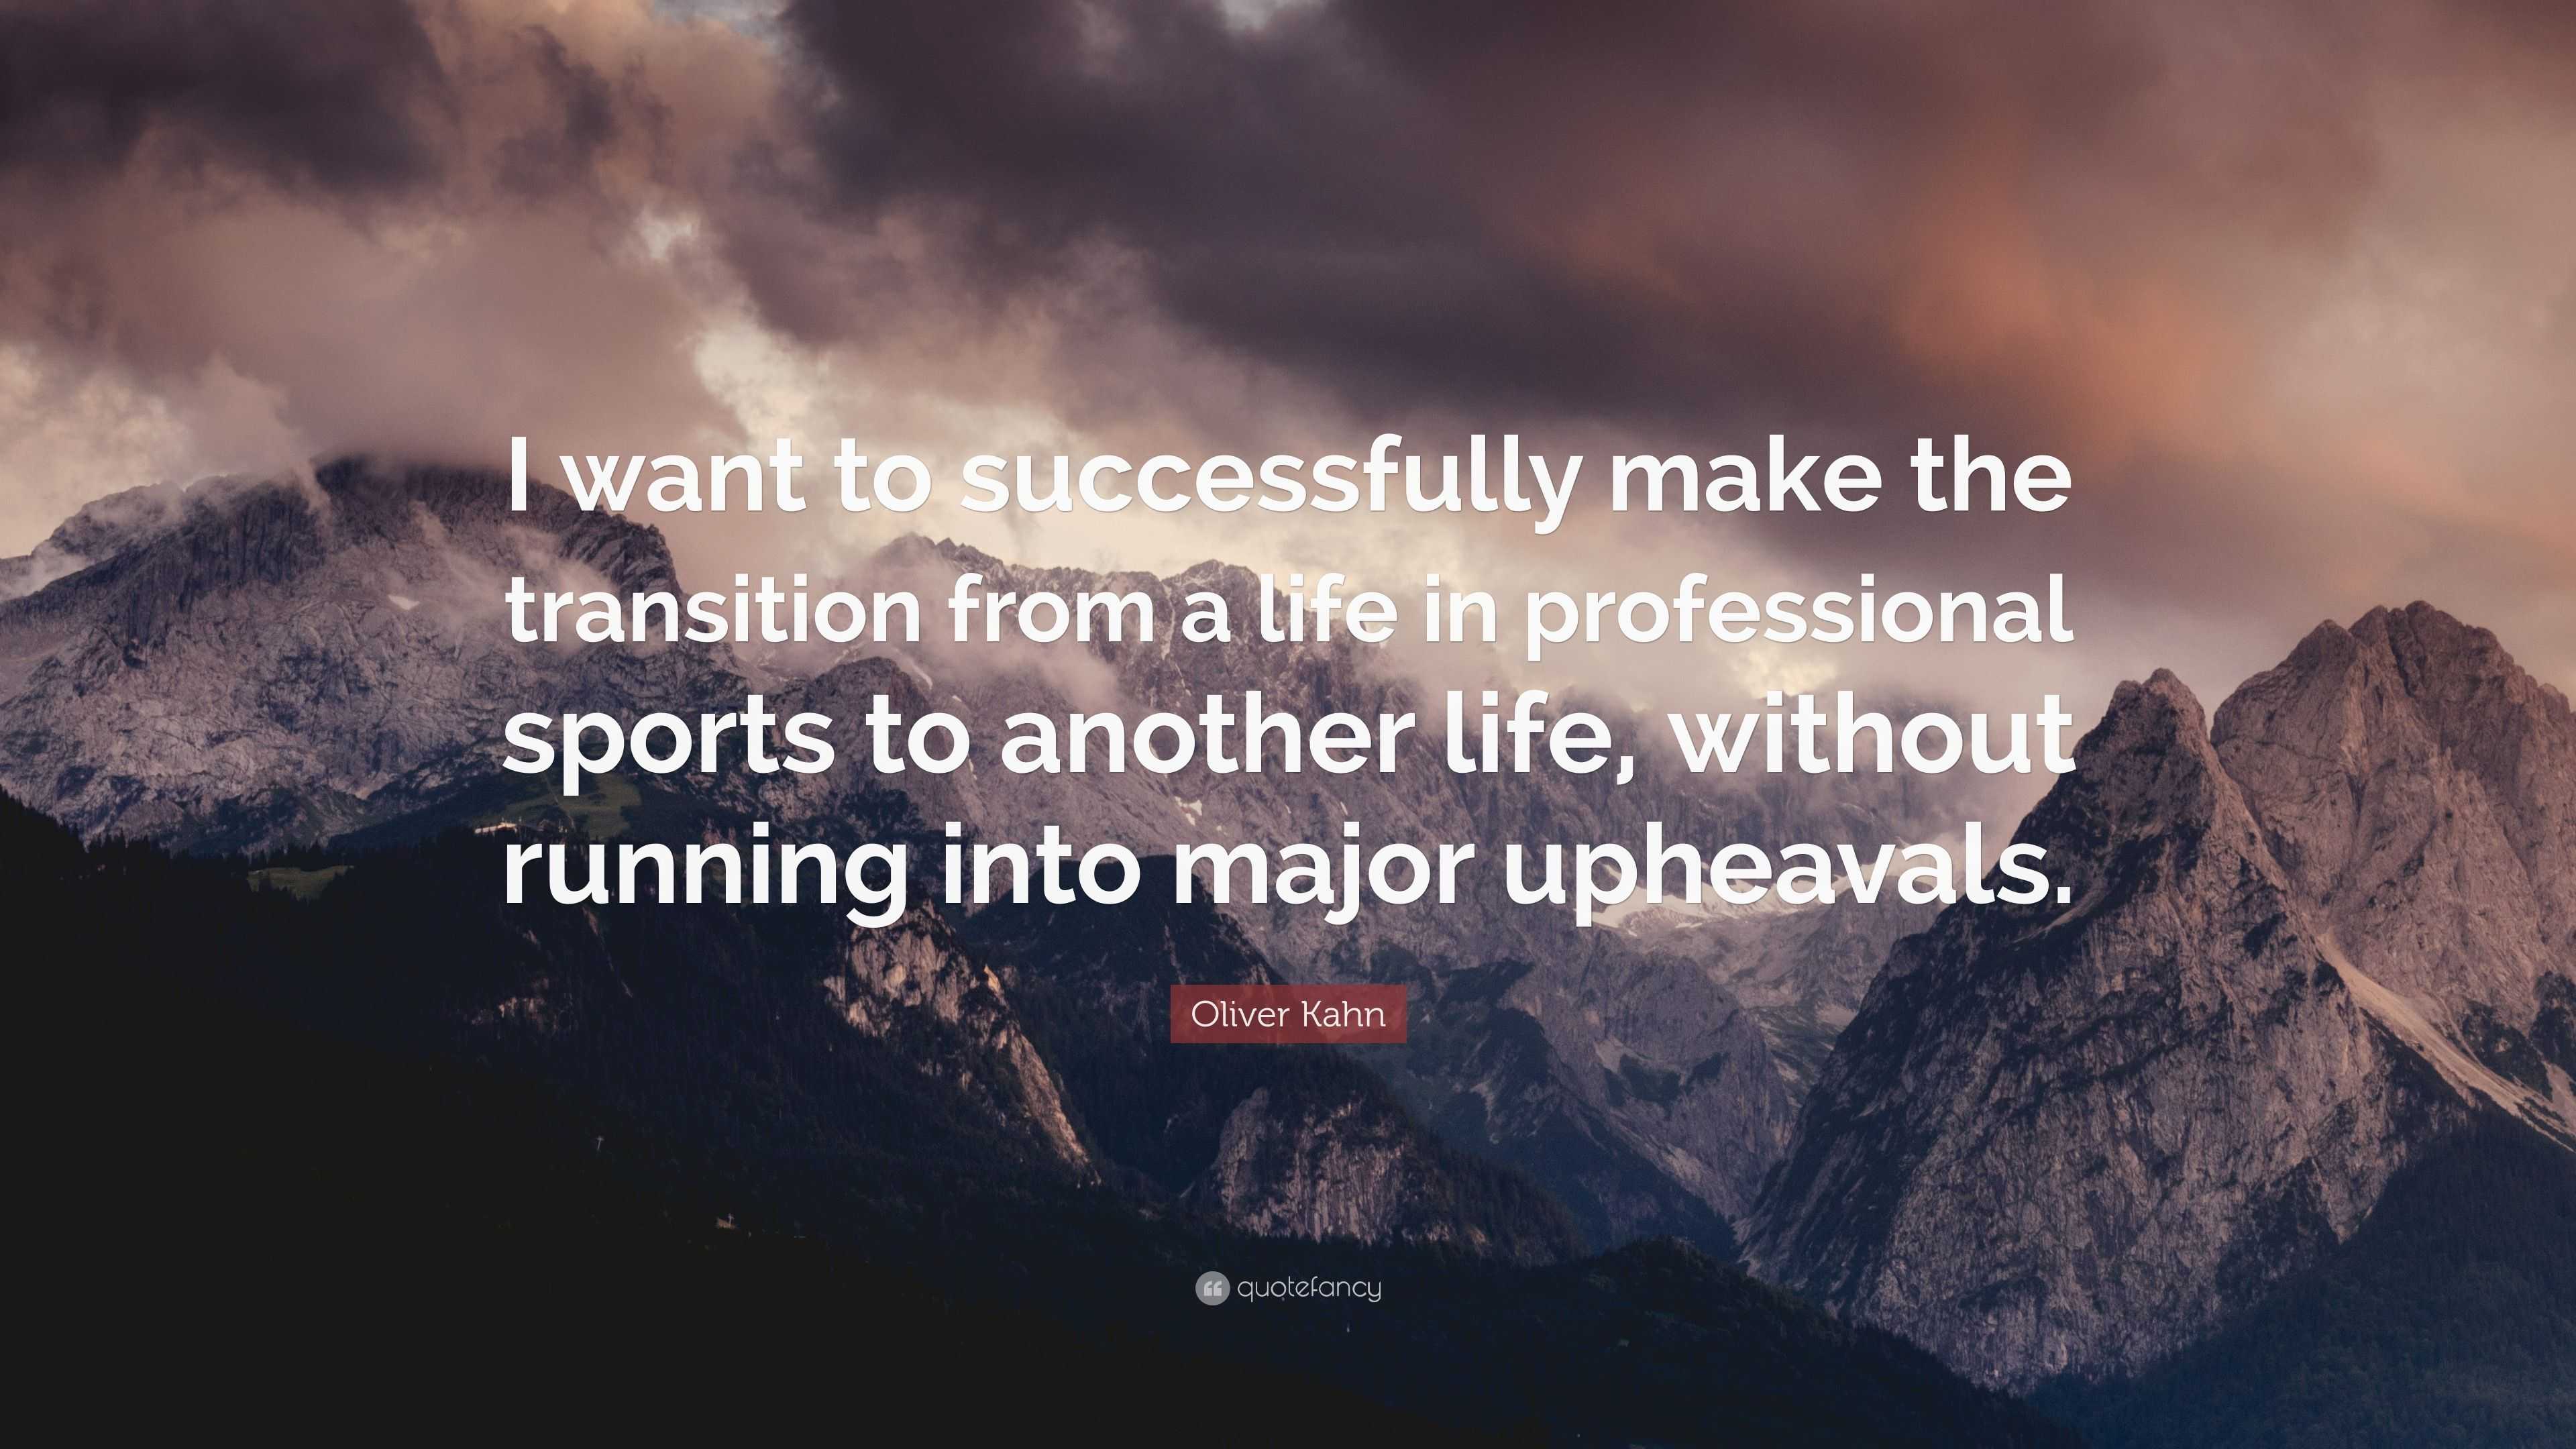 Oliver Kahn Quote “I want to successfully make the transition from a life in